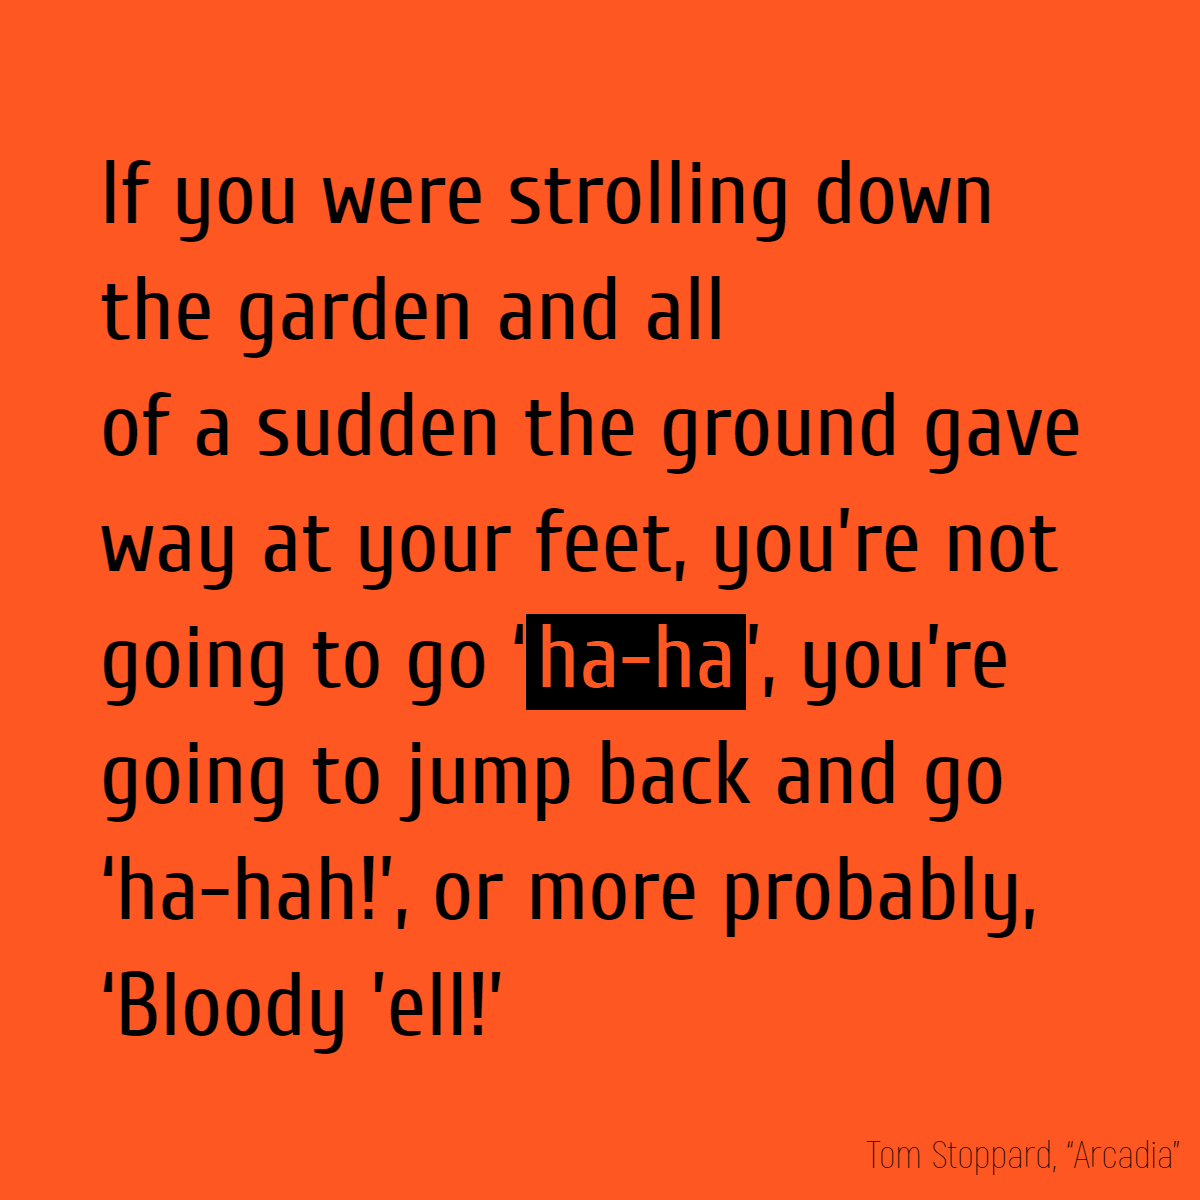 If you were strolling down the garden and all of a sudden the ground gave way at your feet, you’re not going to go ‘ha-ha’, you’re going to jump back and go ‘ha-hah!’, or more probably, ‘Bloody ’ell!’